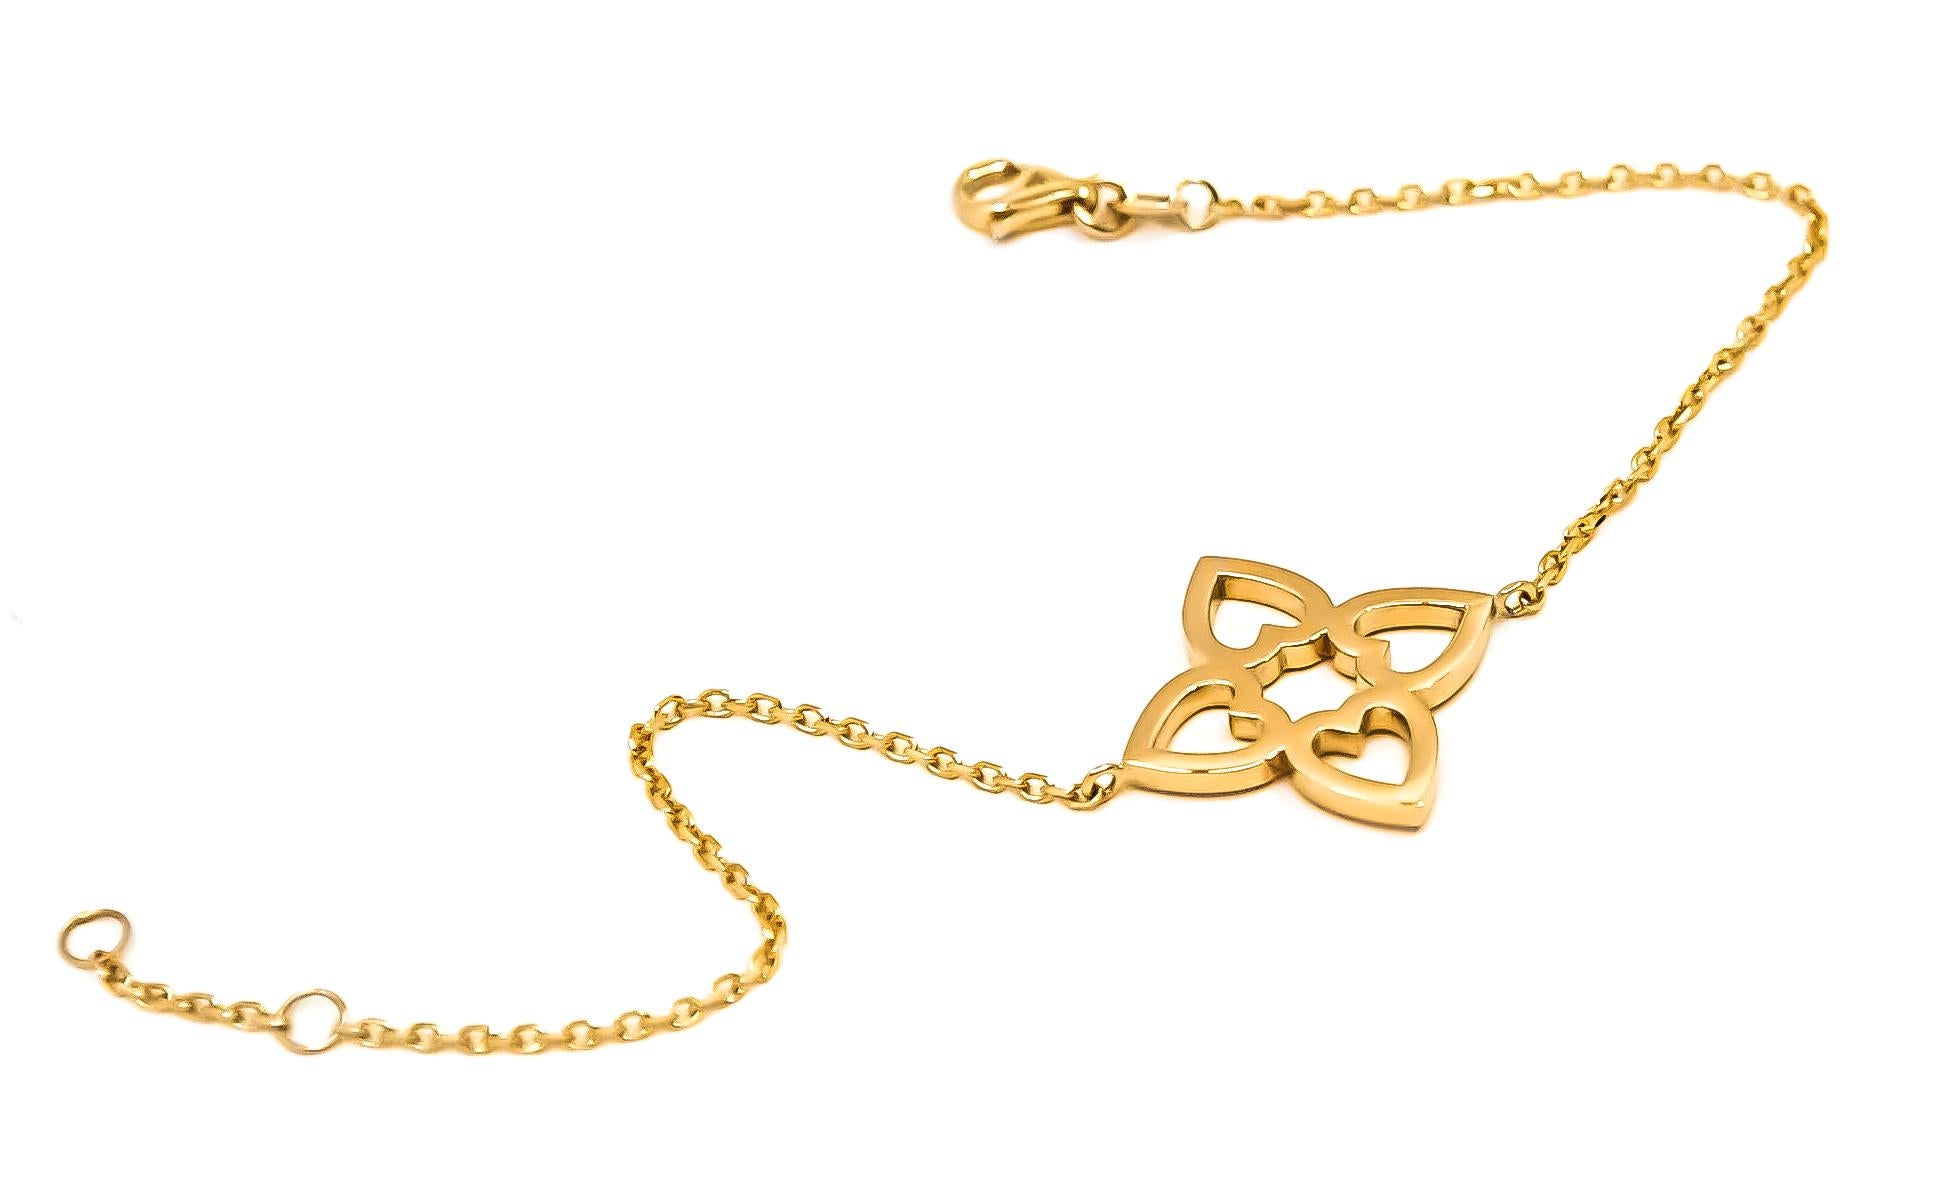 Women's Connected Hearts Bracelet in 18kt Gold For Sale